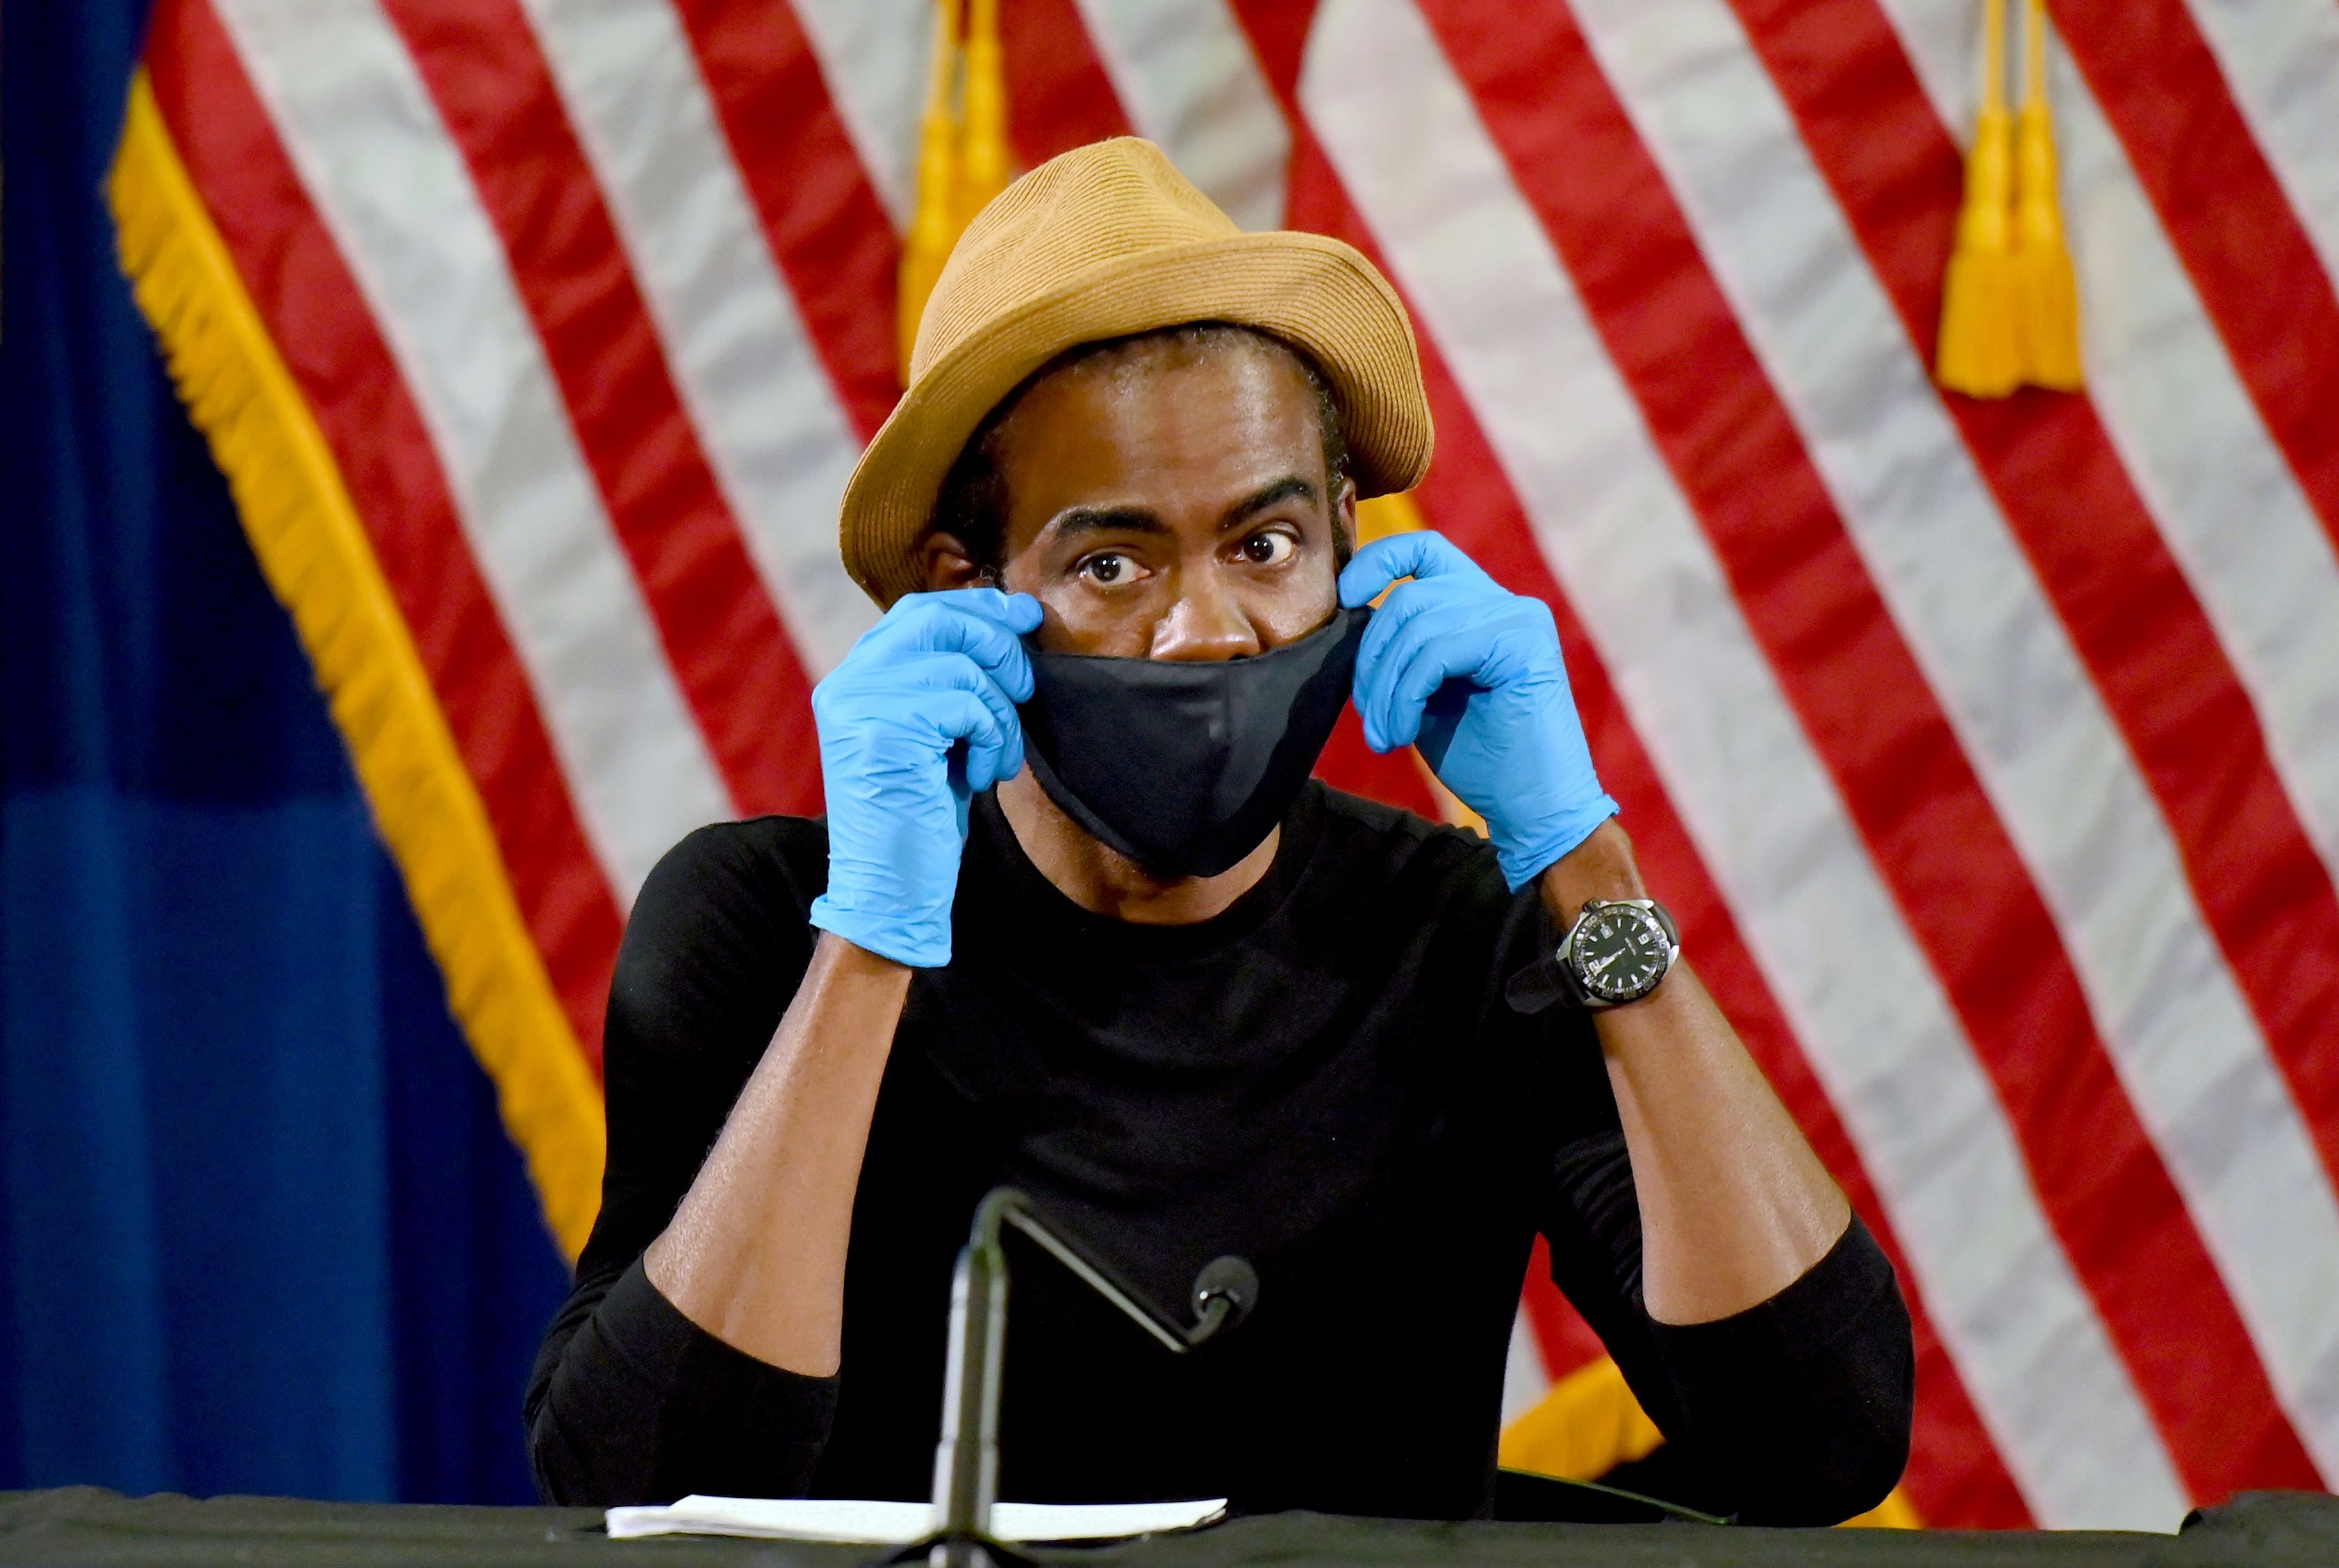 Chris Rock in mask in front of American flag